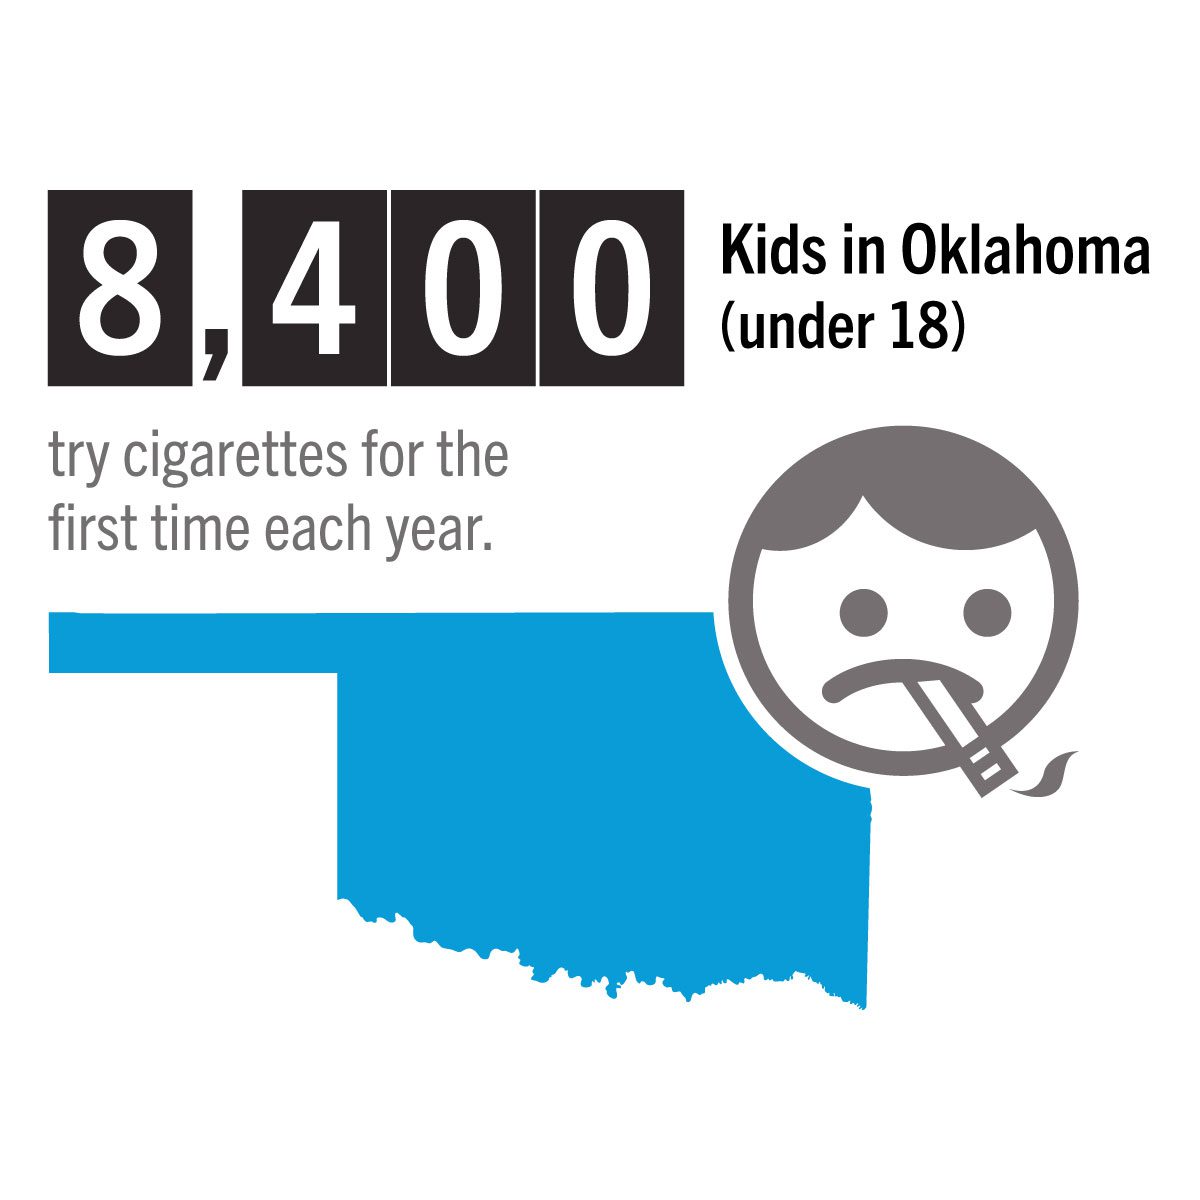 8,400 kids under 18 in Oklahoma try cigarettes for the first time each year. 